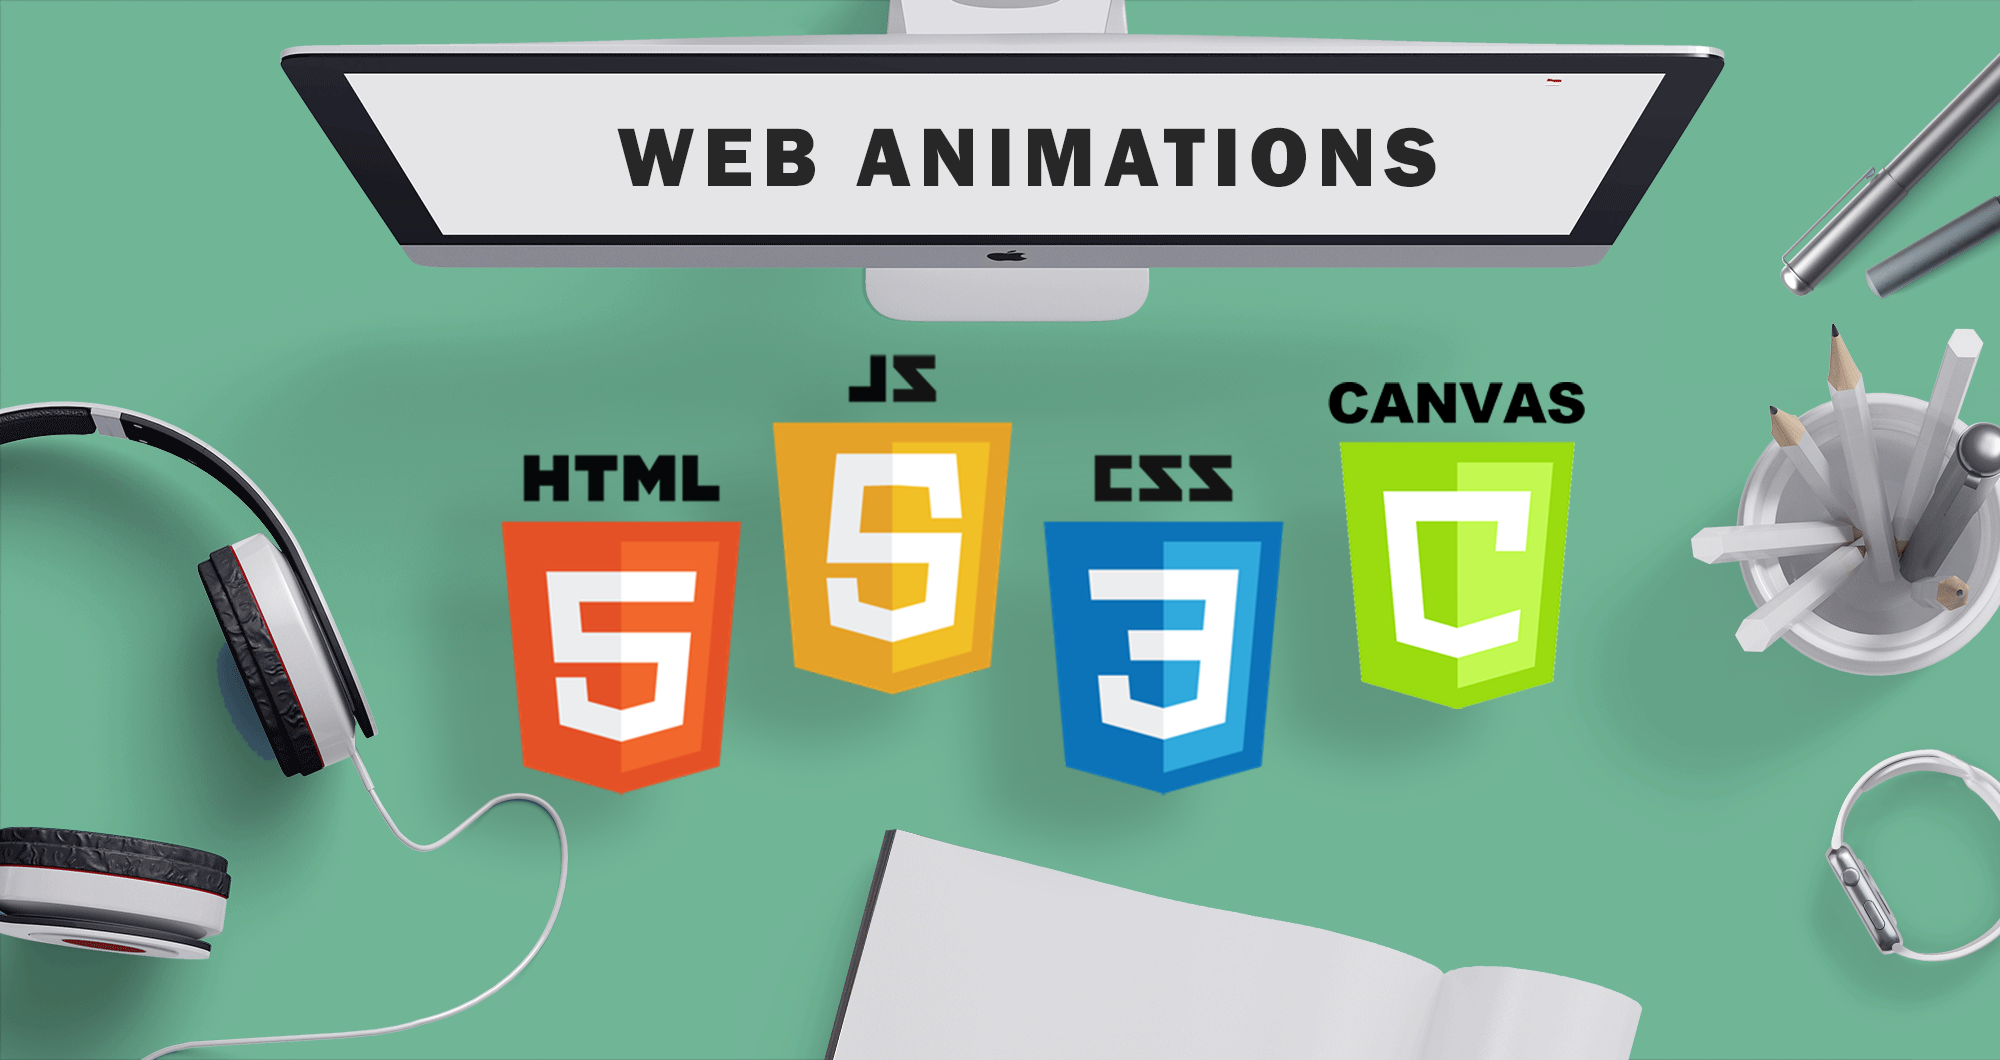 Web Animation with CSS3, JavaScript and HTML 5 canvas